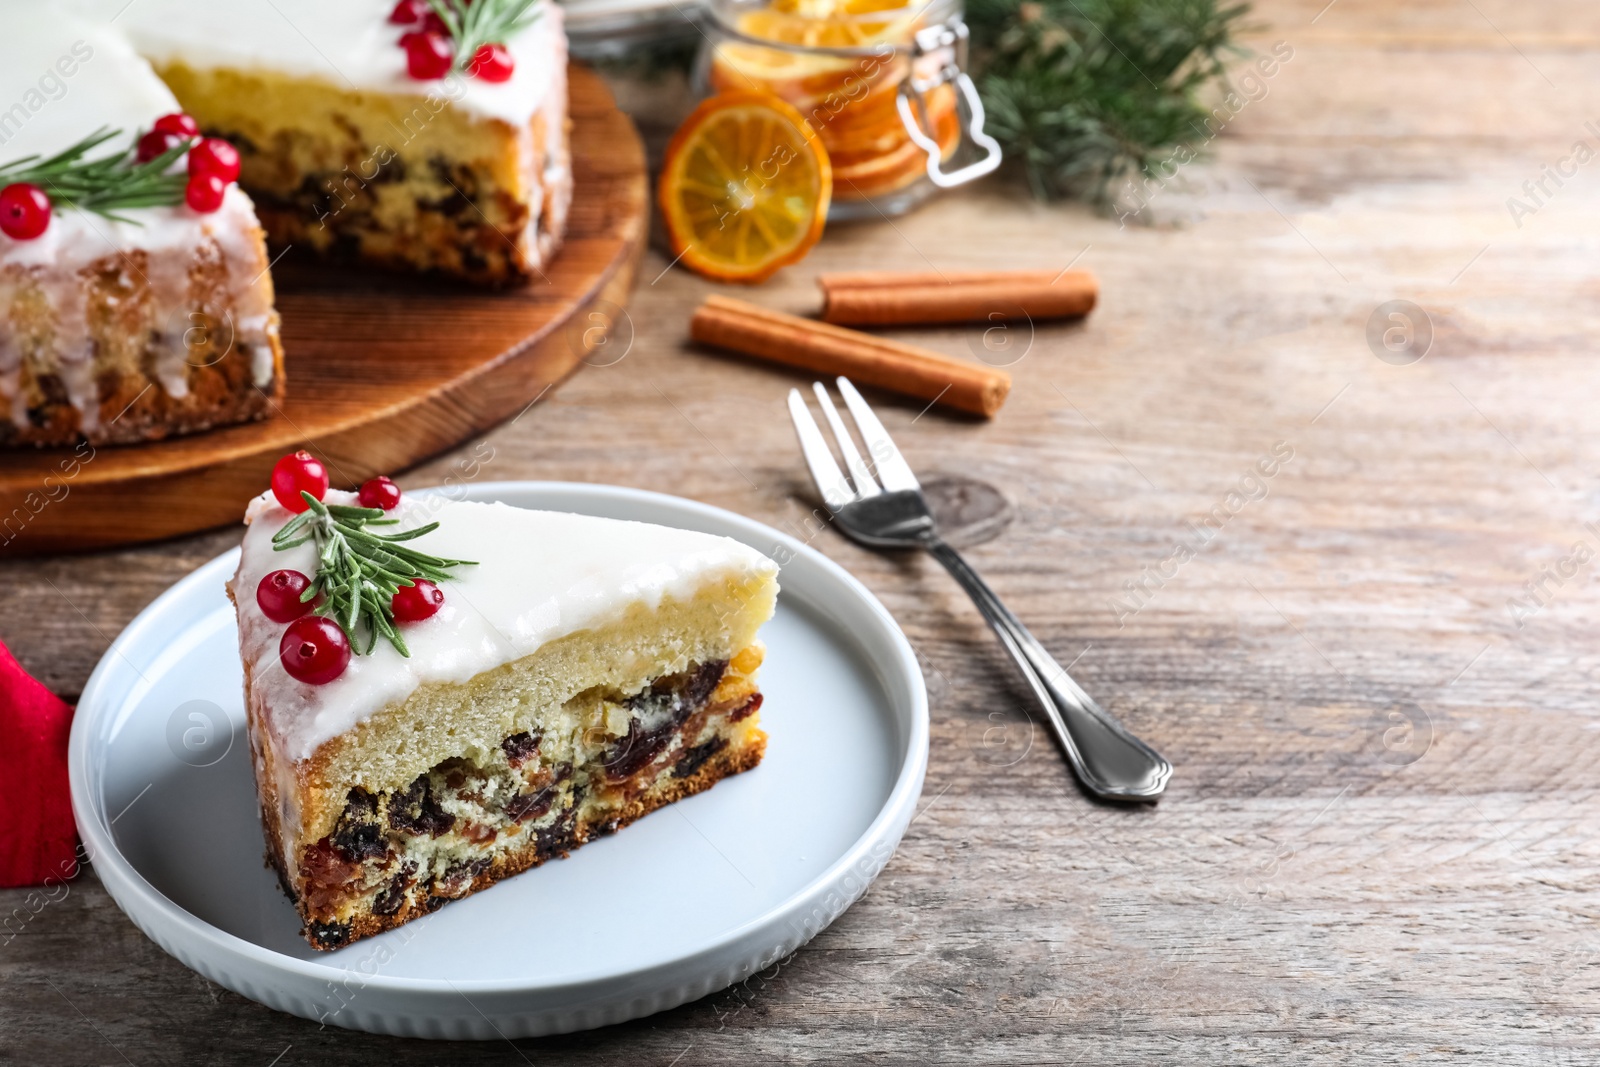 Photo of Slicetraditional Christmas cake decorated with rosemary and cranberries on wooden table